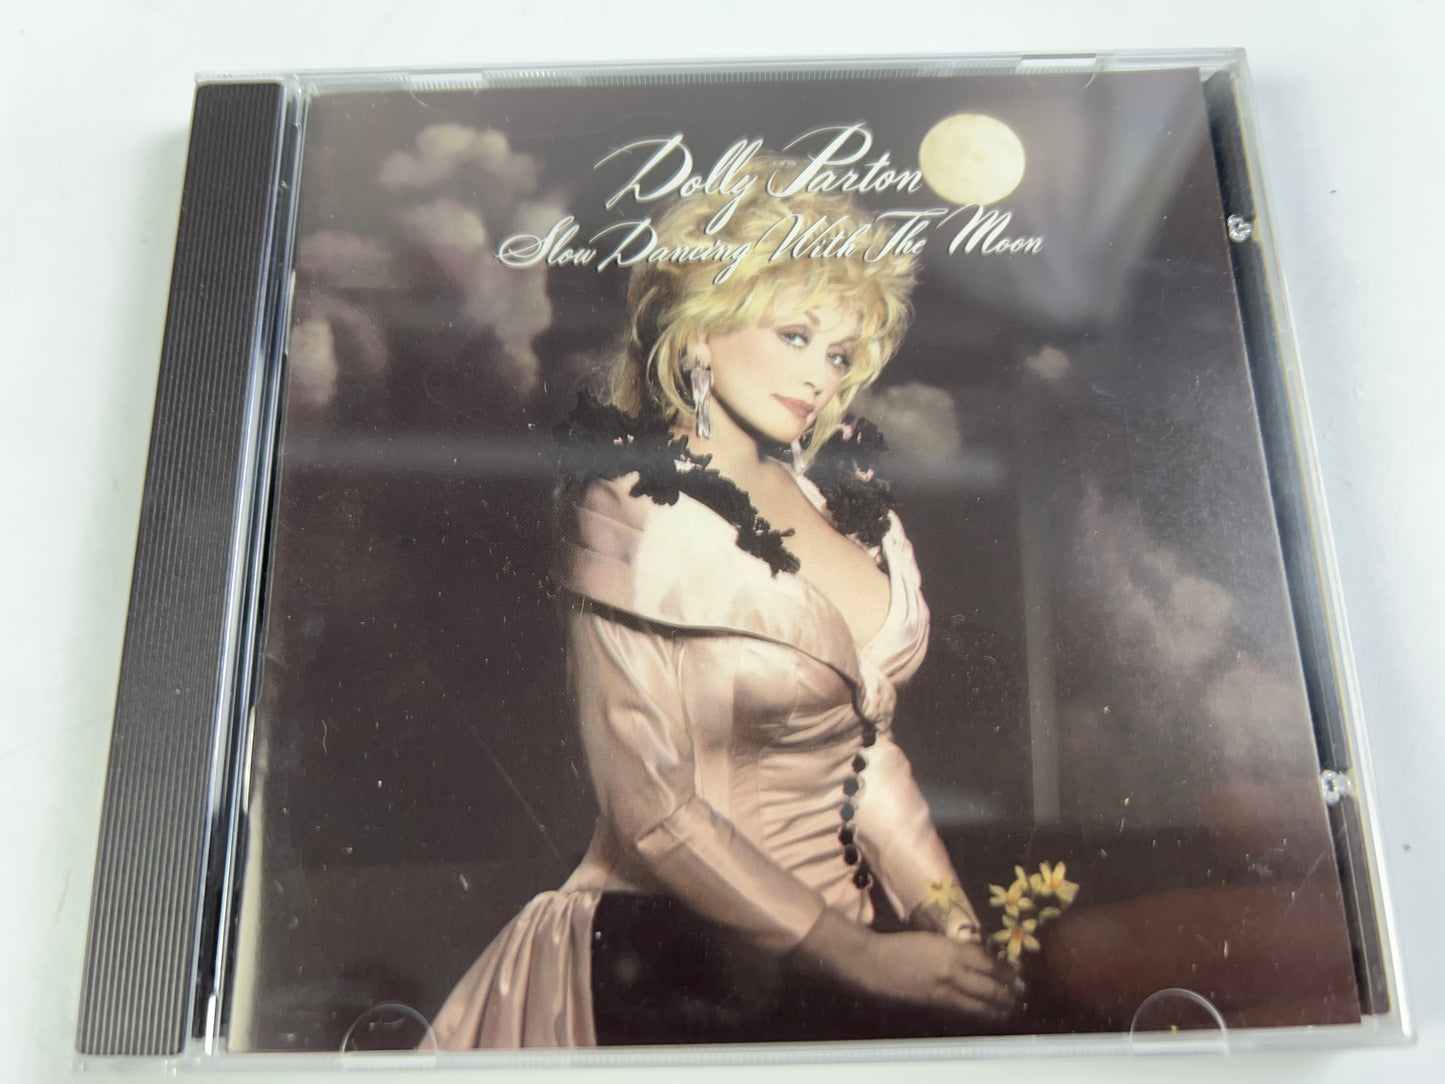 Slow Dancing With the Moon - Music CD - Parton, Dolly - 1993-02-23 - Columbia